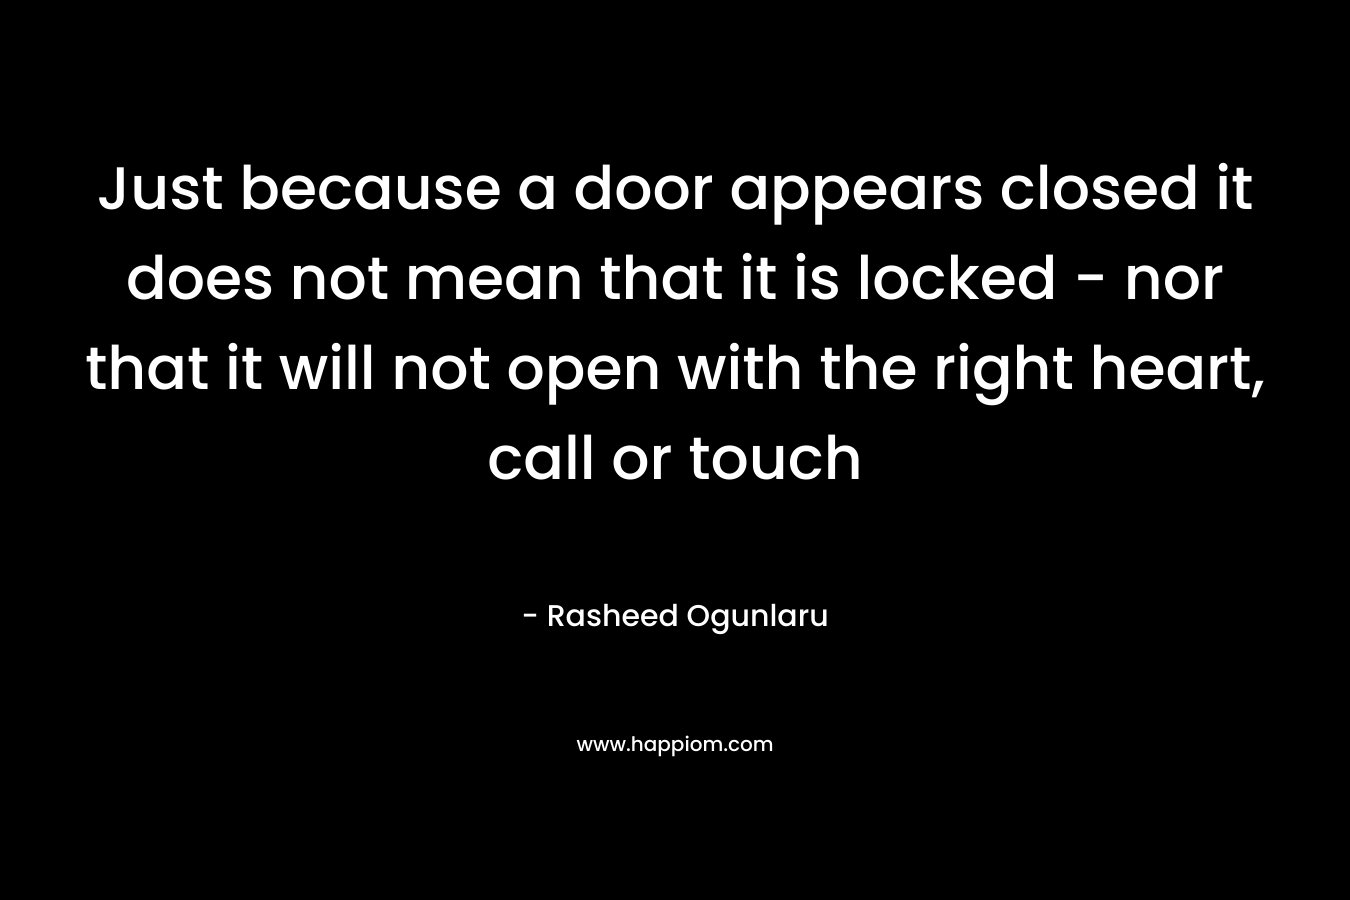 Just because a door appears closed it does not mean that it is locked - nor that it will not open with the right heart, call or touch